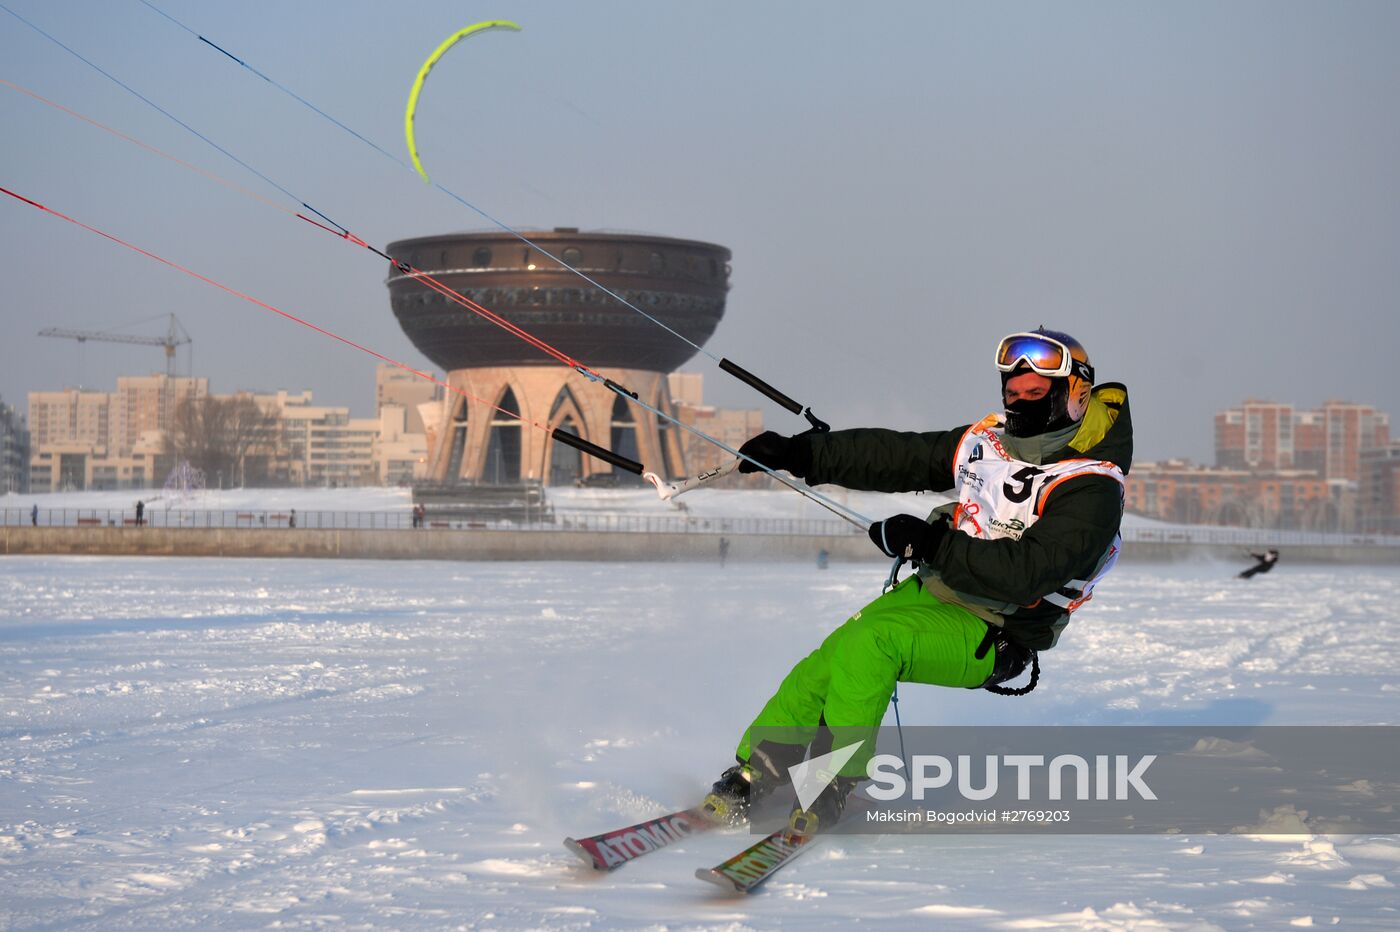 Russian Sailing Cup first stage in Kazan